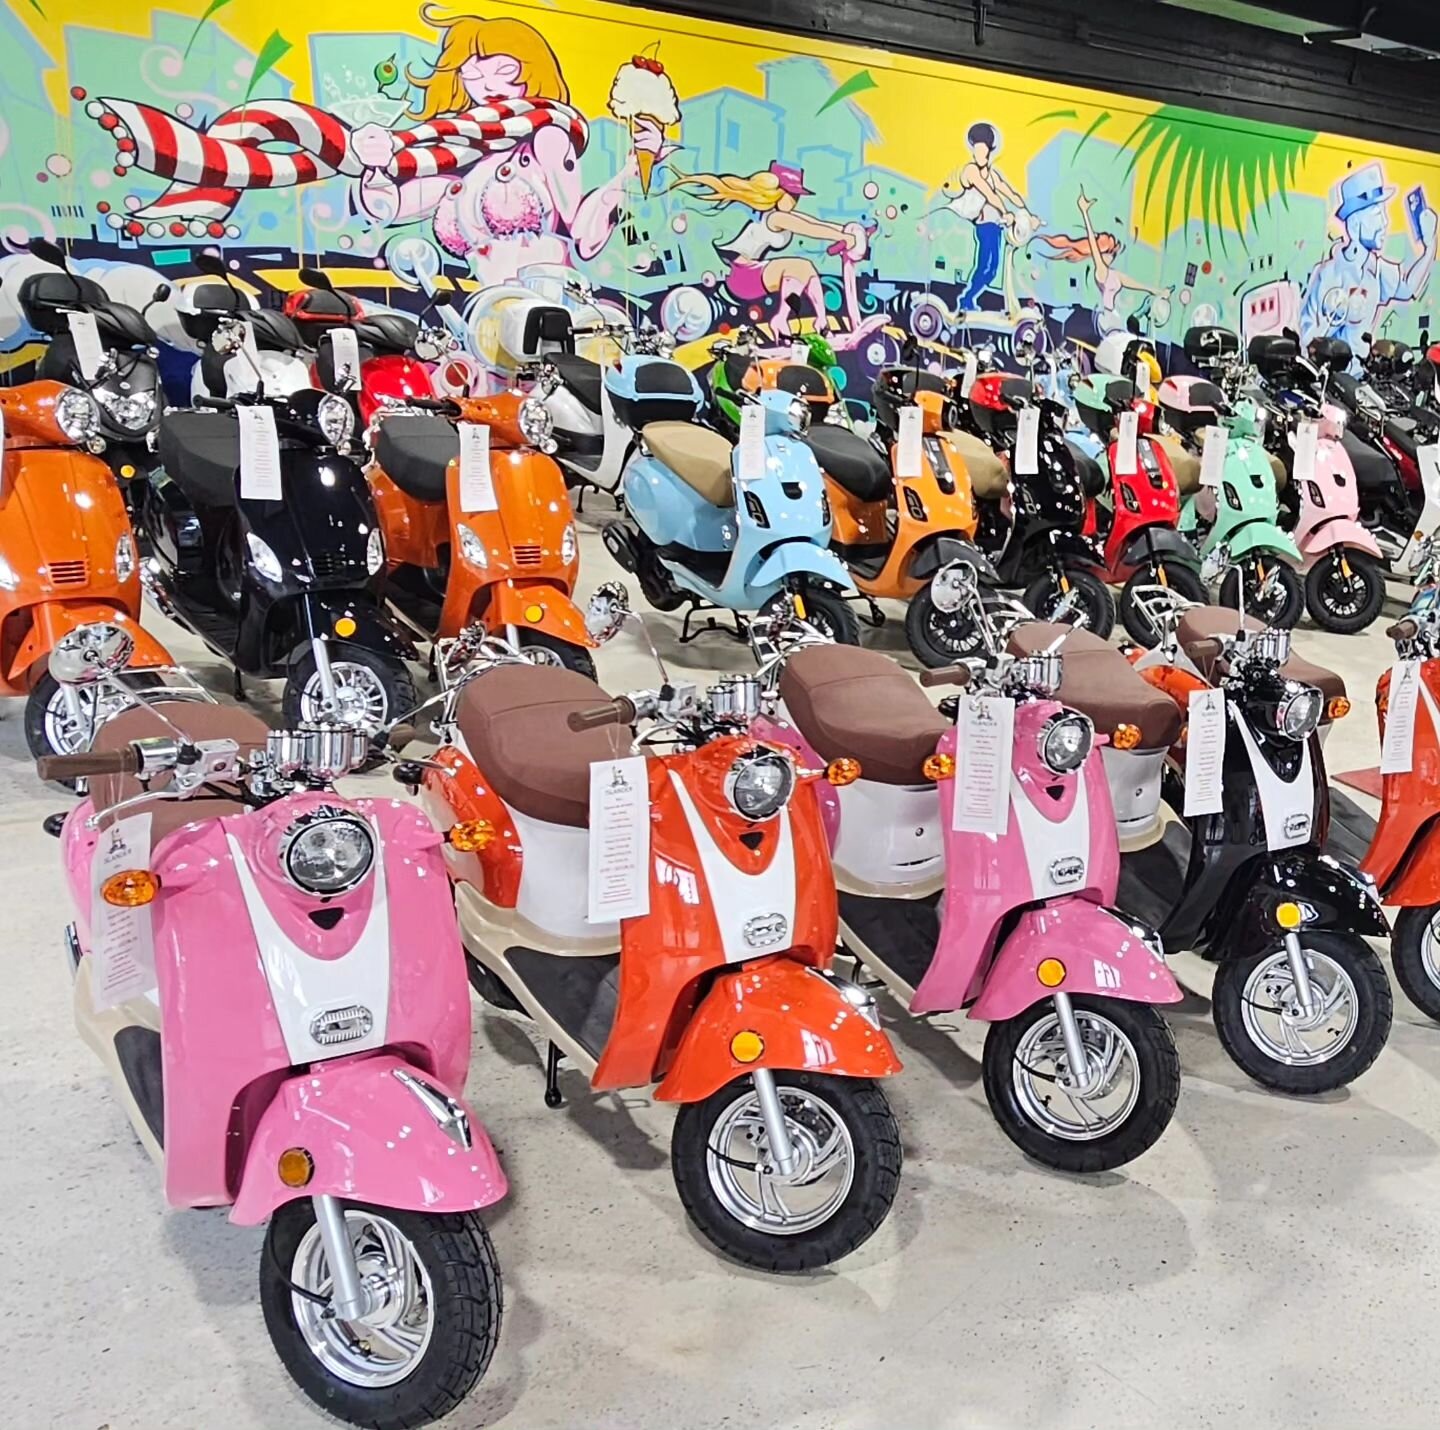 *****FLASH SALE*****
10/11/23 througjh 10/14/23

Buy any Wolf Brand or Italica Scooter at full price and get 50% off a second Wolf or Italica Scooter of equal or lesser value!  Current inventory only and no trades considered. No substitutions or modi